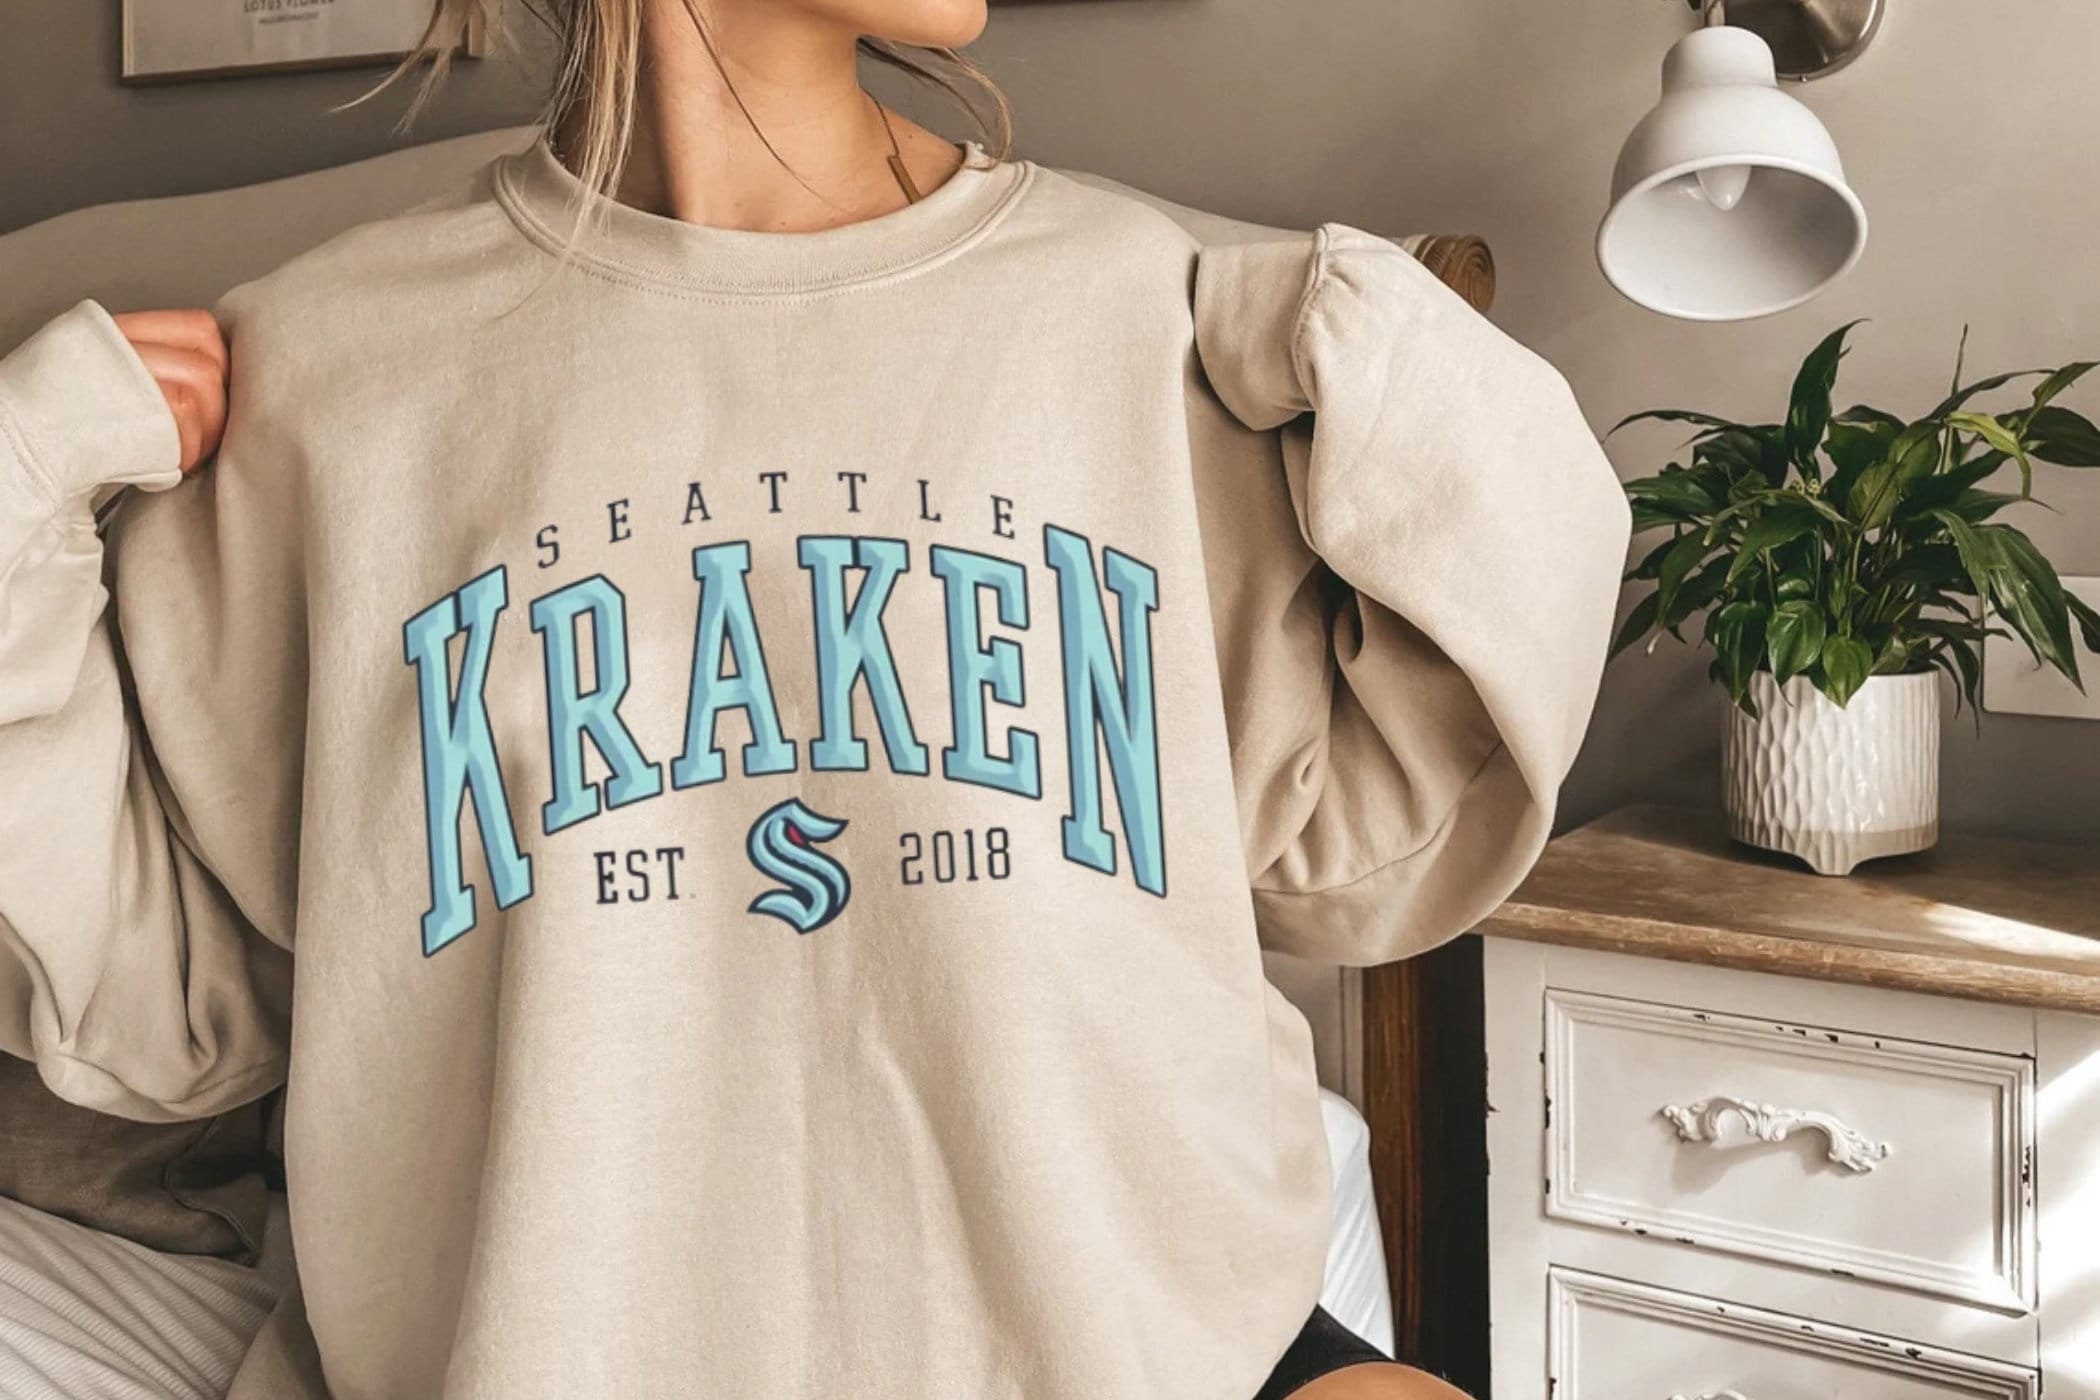 Seattle Kraken Youth Mascot Callout T-shirt,Sweater, Hoodie, And